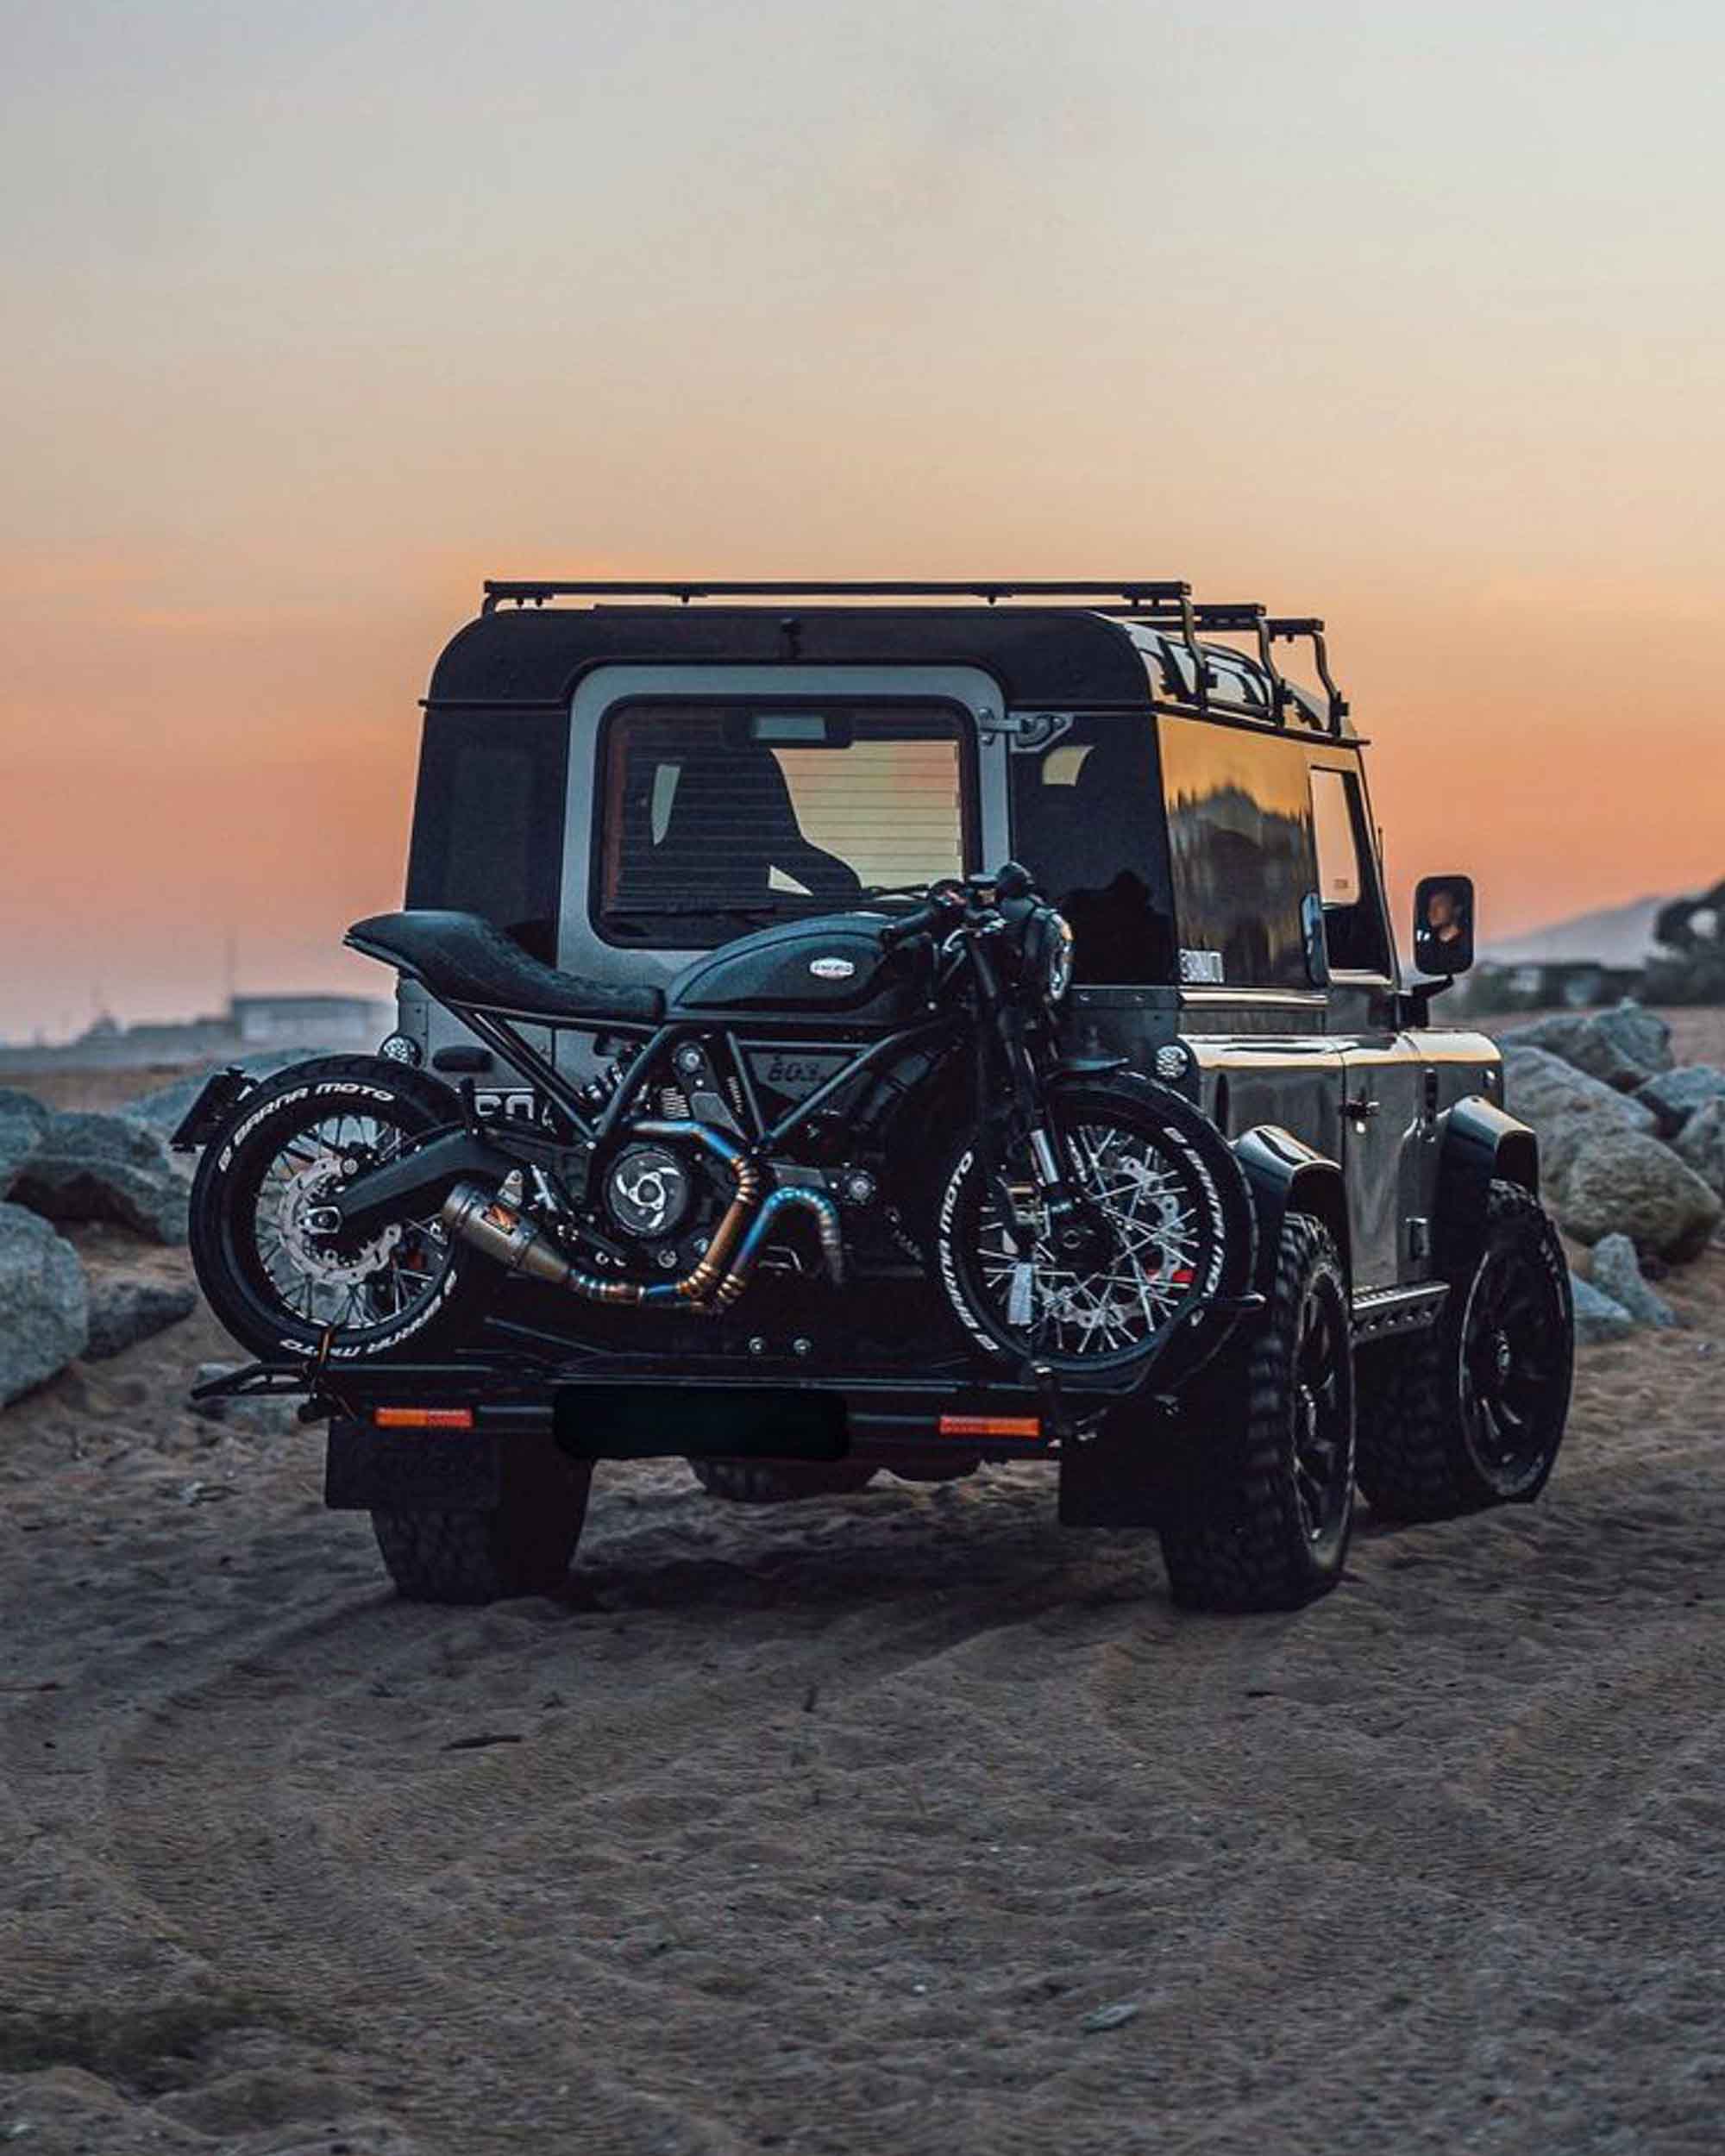 Ducati Scrambler Hitch Mount Motorcycle Carrier on a Land Rover Defender